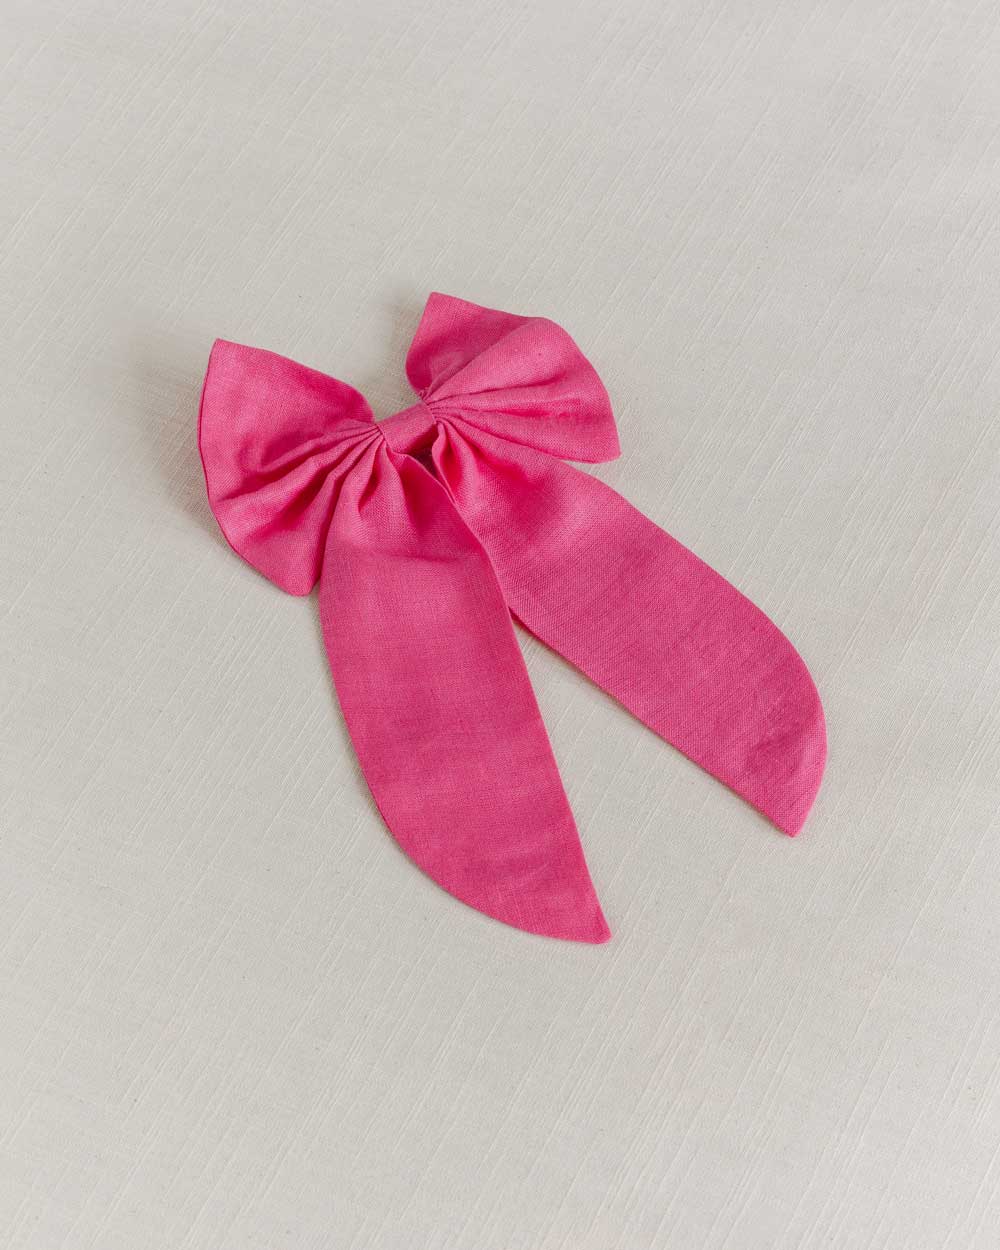 THE HOT PINK LINEN BOW